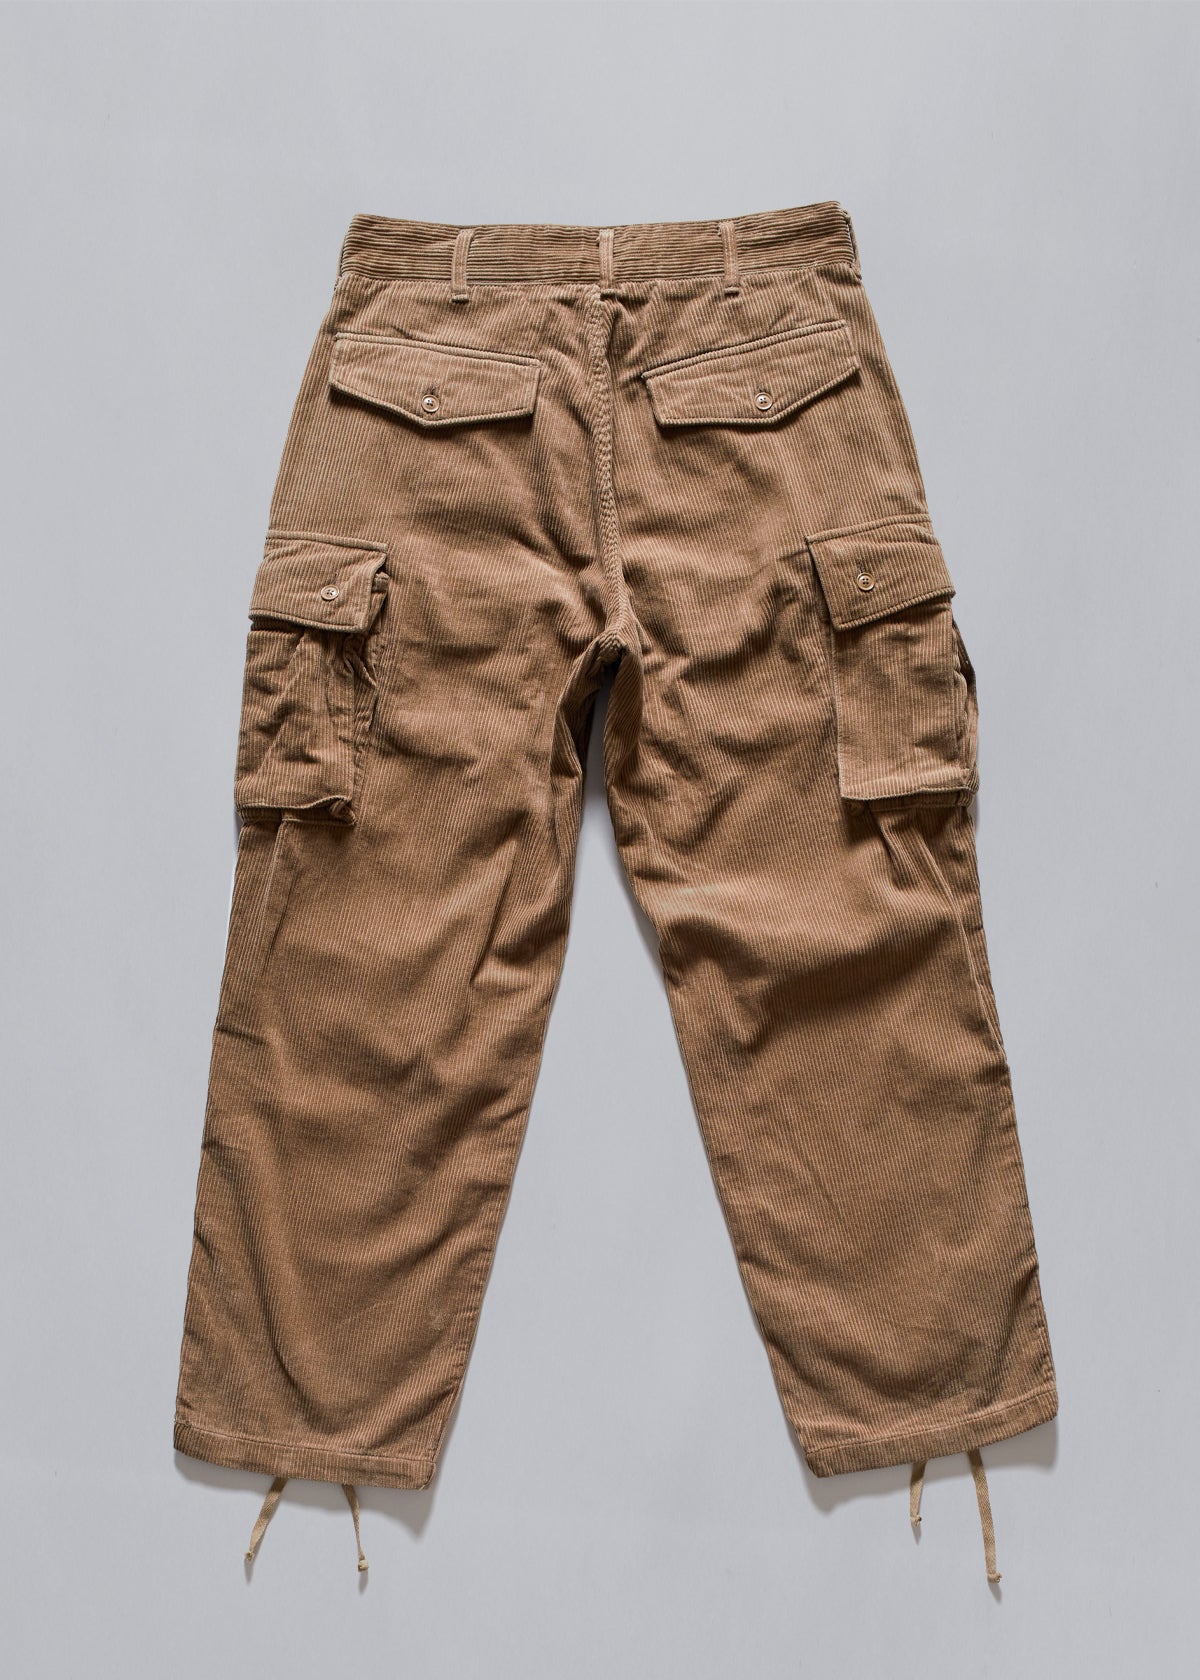 Corduroy FA Pants AW2021 - Small - The Archivist Store